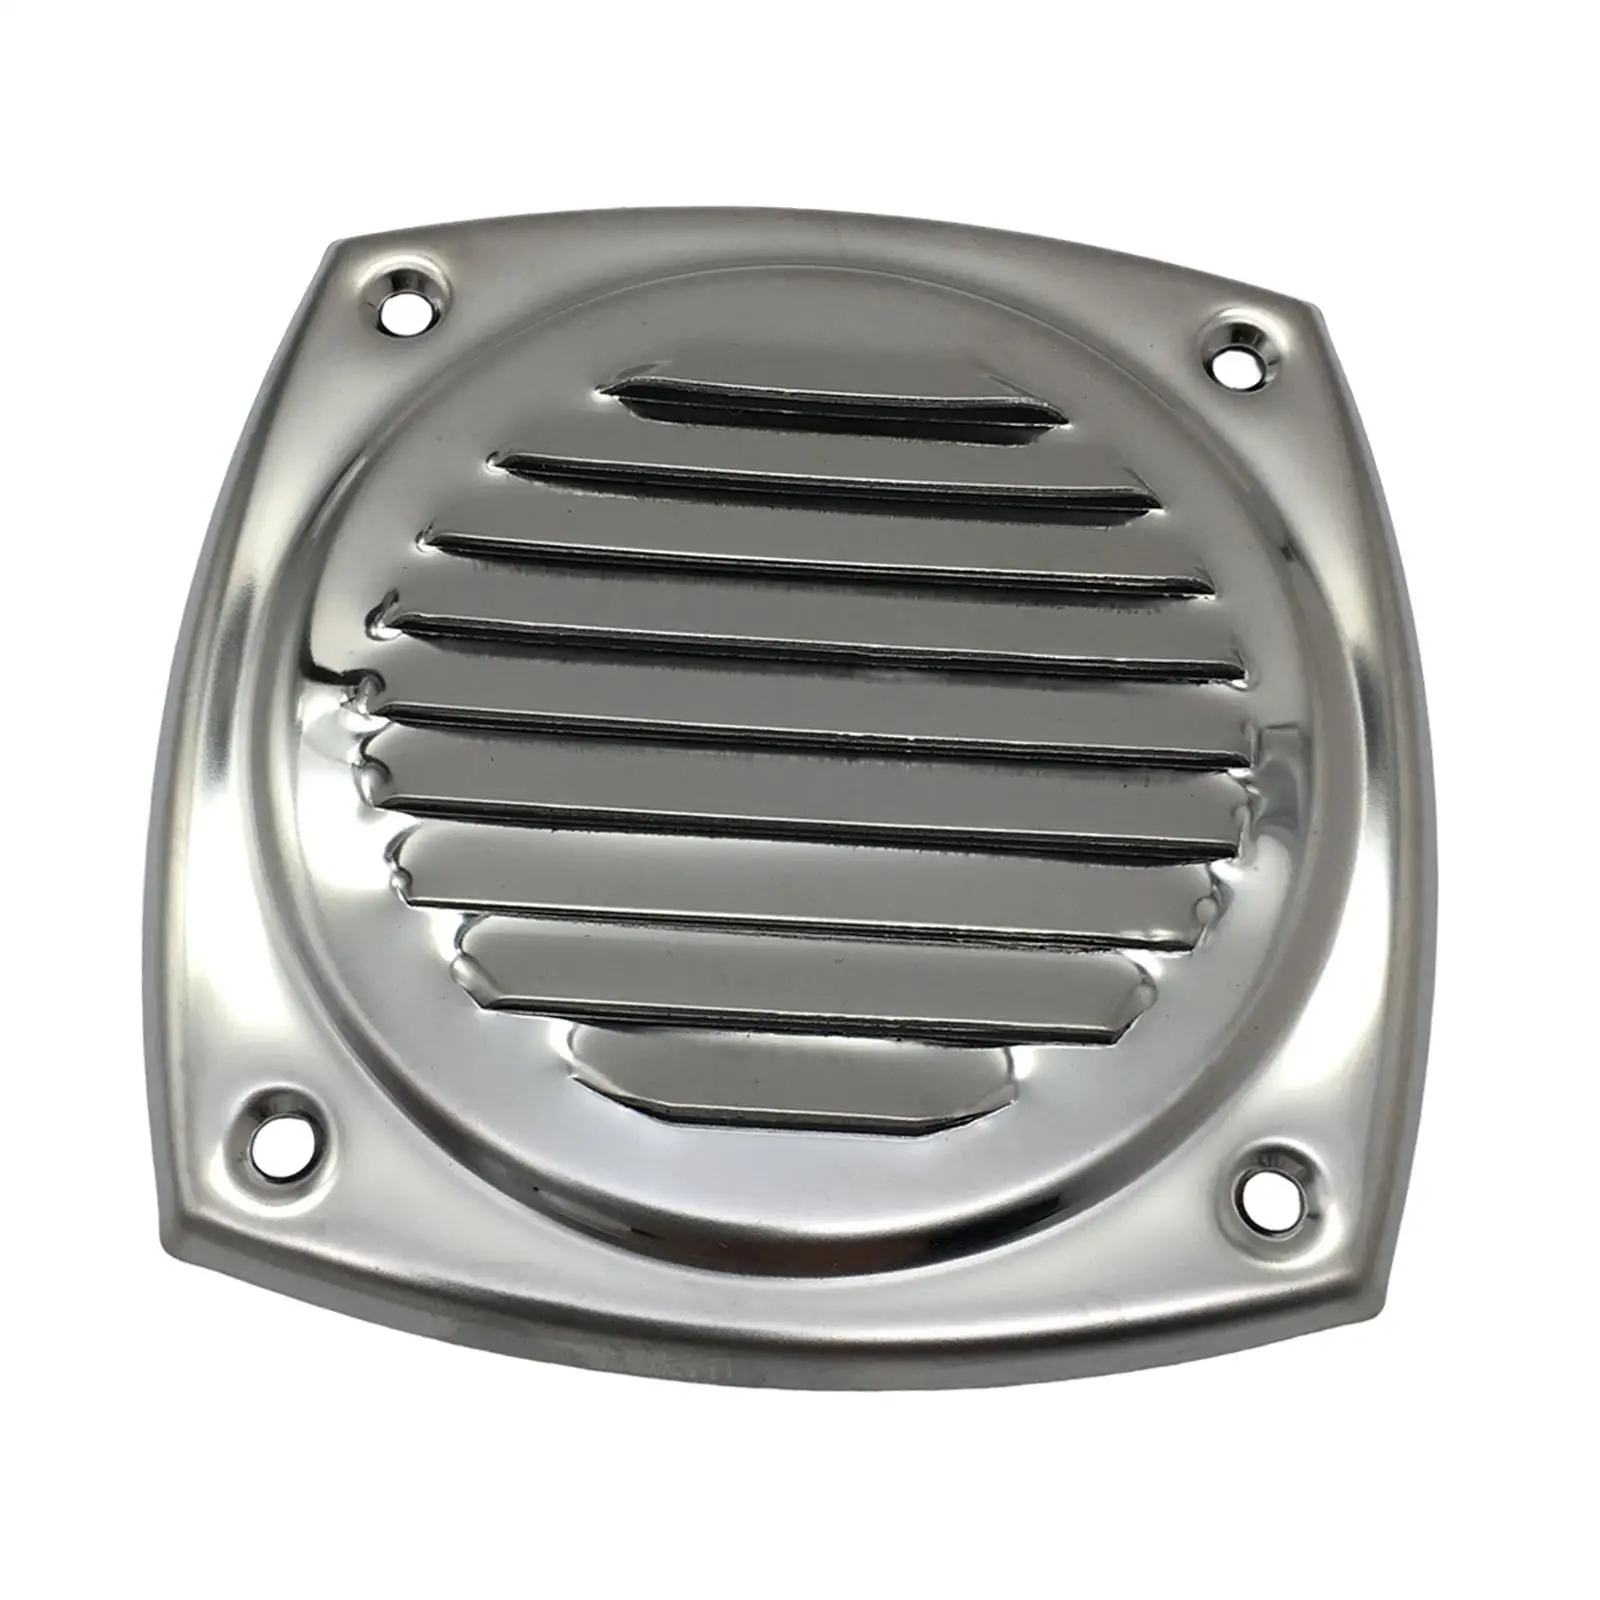 Vent Grille Stainless Hood for Boat Yacht Caravans